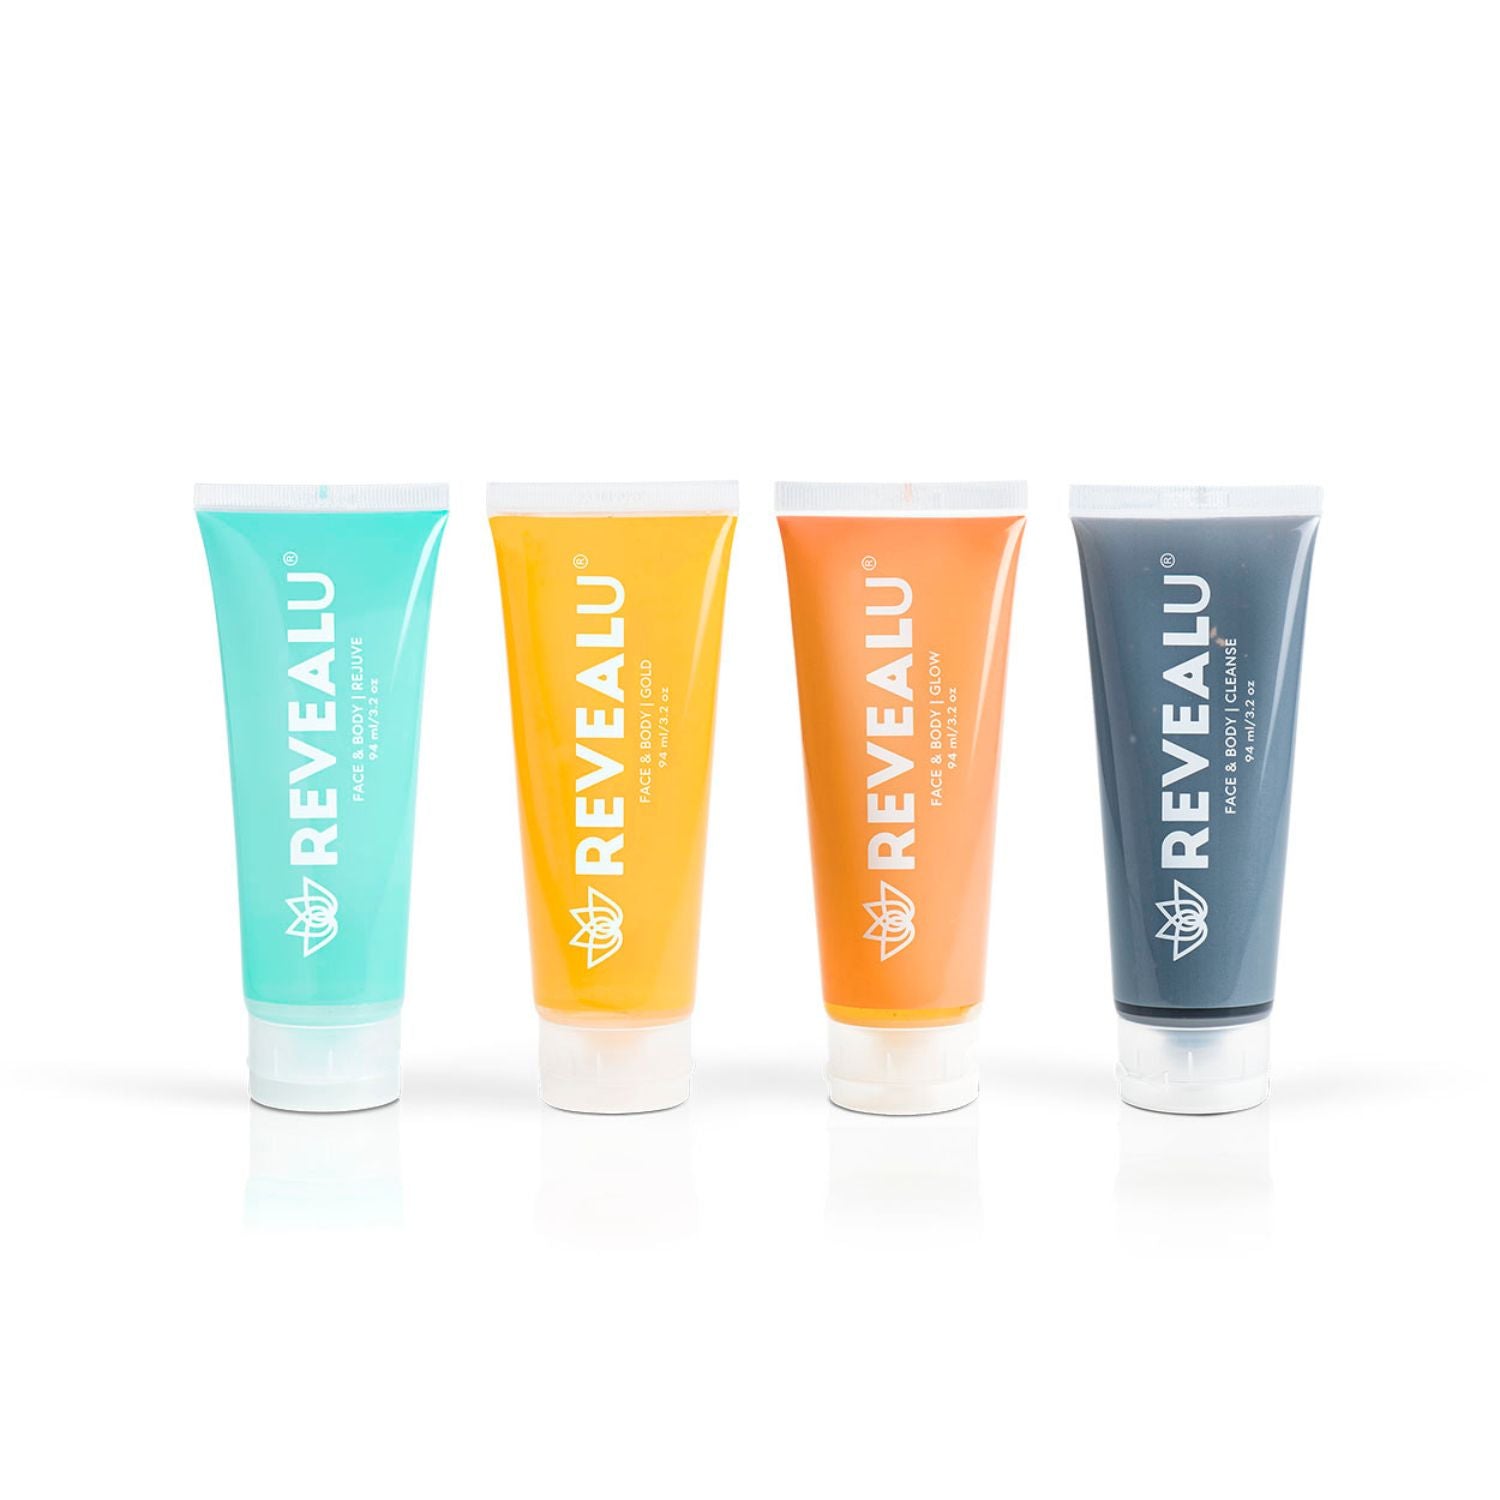 Four tubes of RevealU face and body skincare set displayed in a line